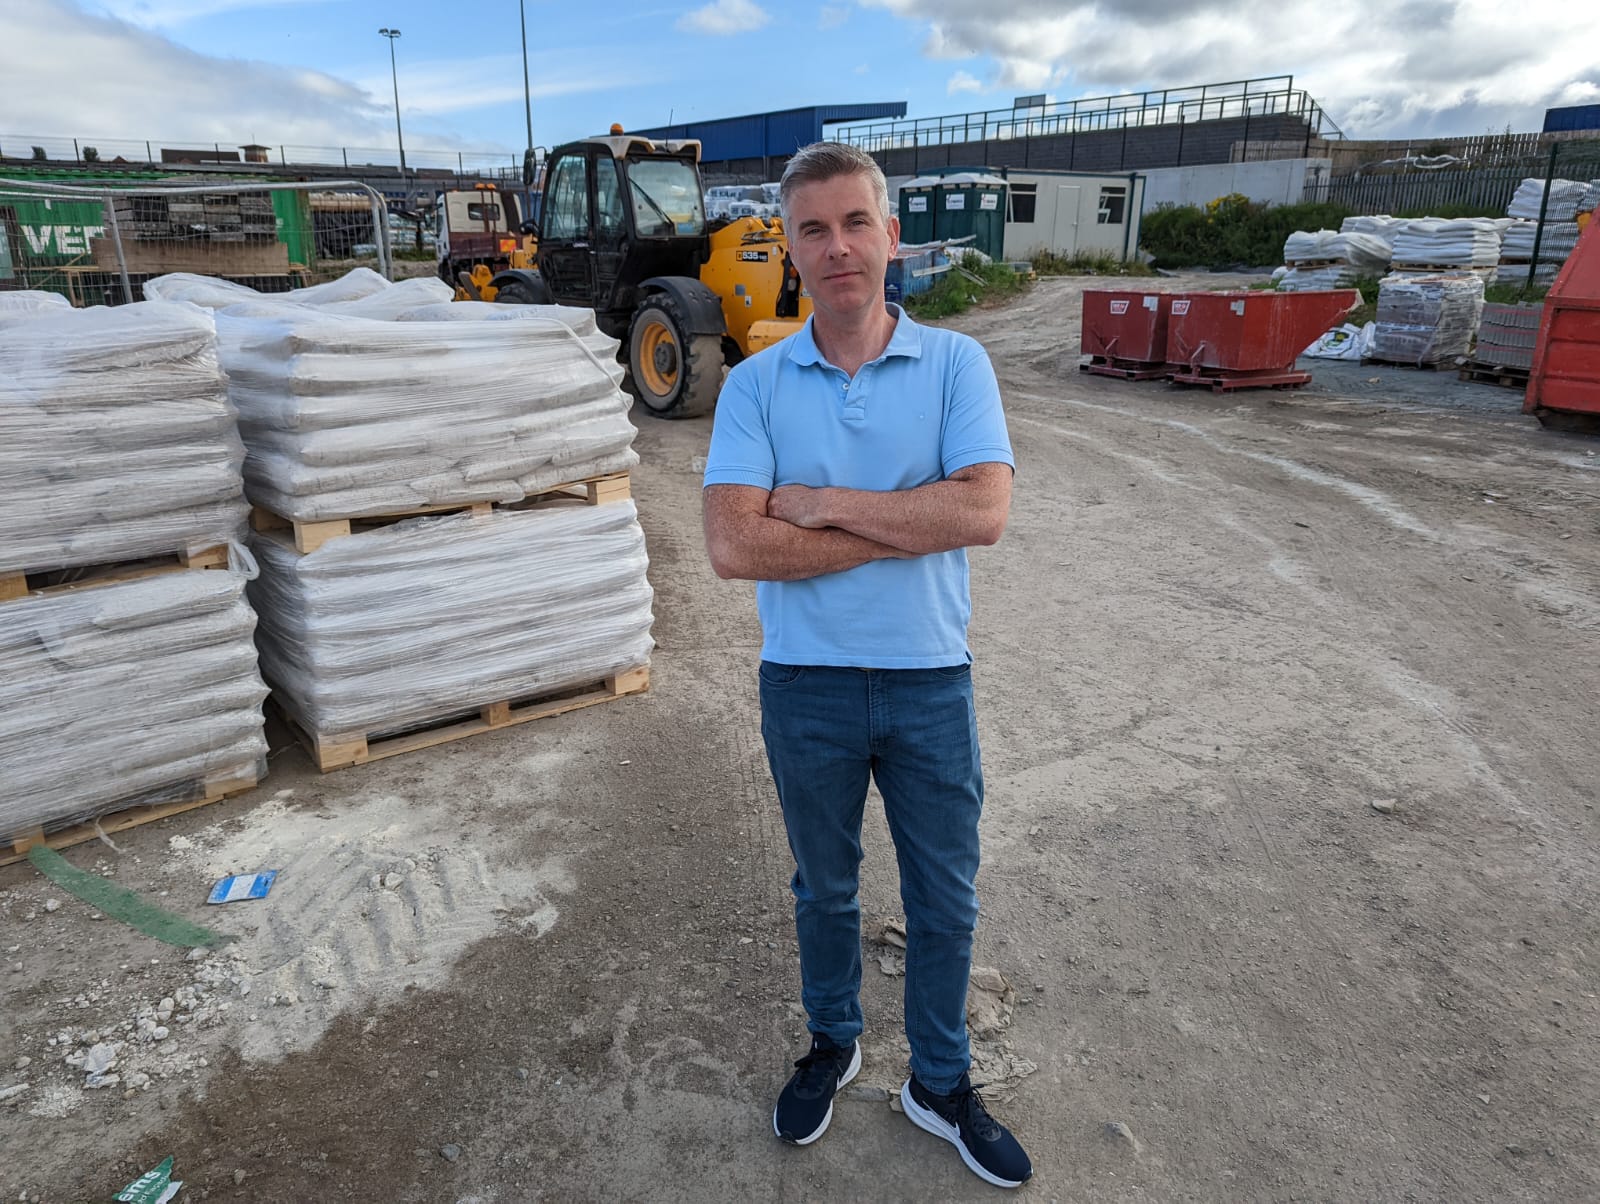 Cllr Steven Corr has condemned those responsible for stealing from the site on the Whiterock Road